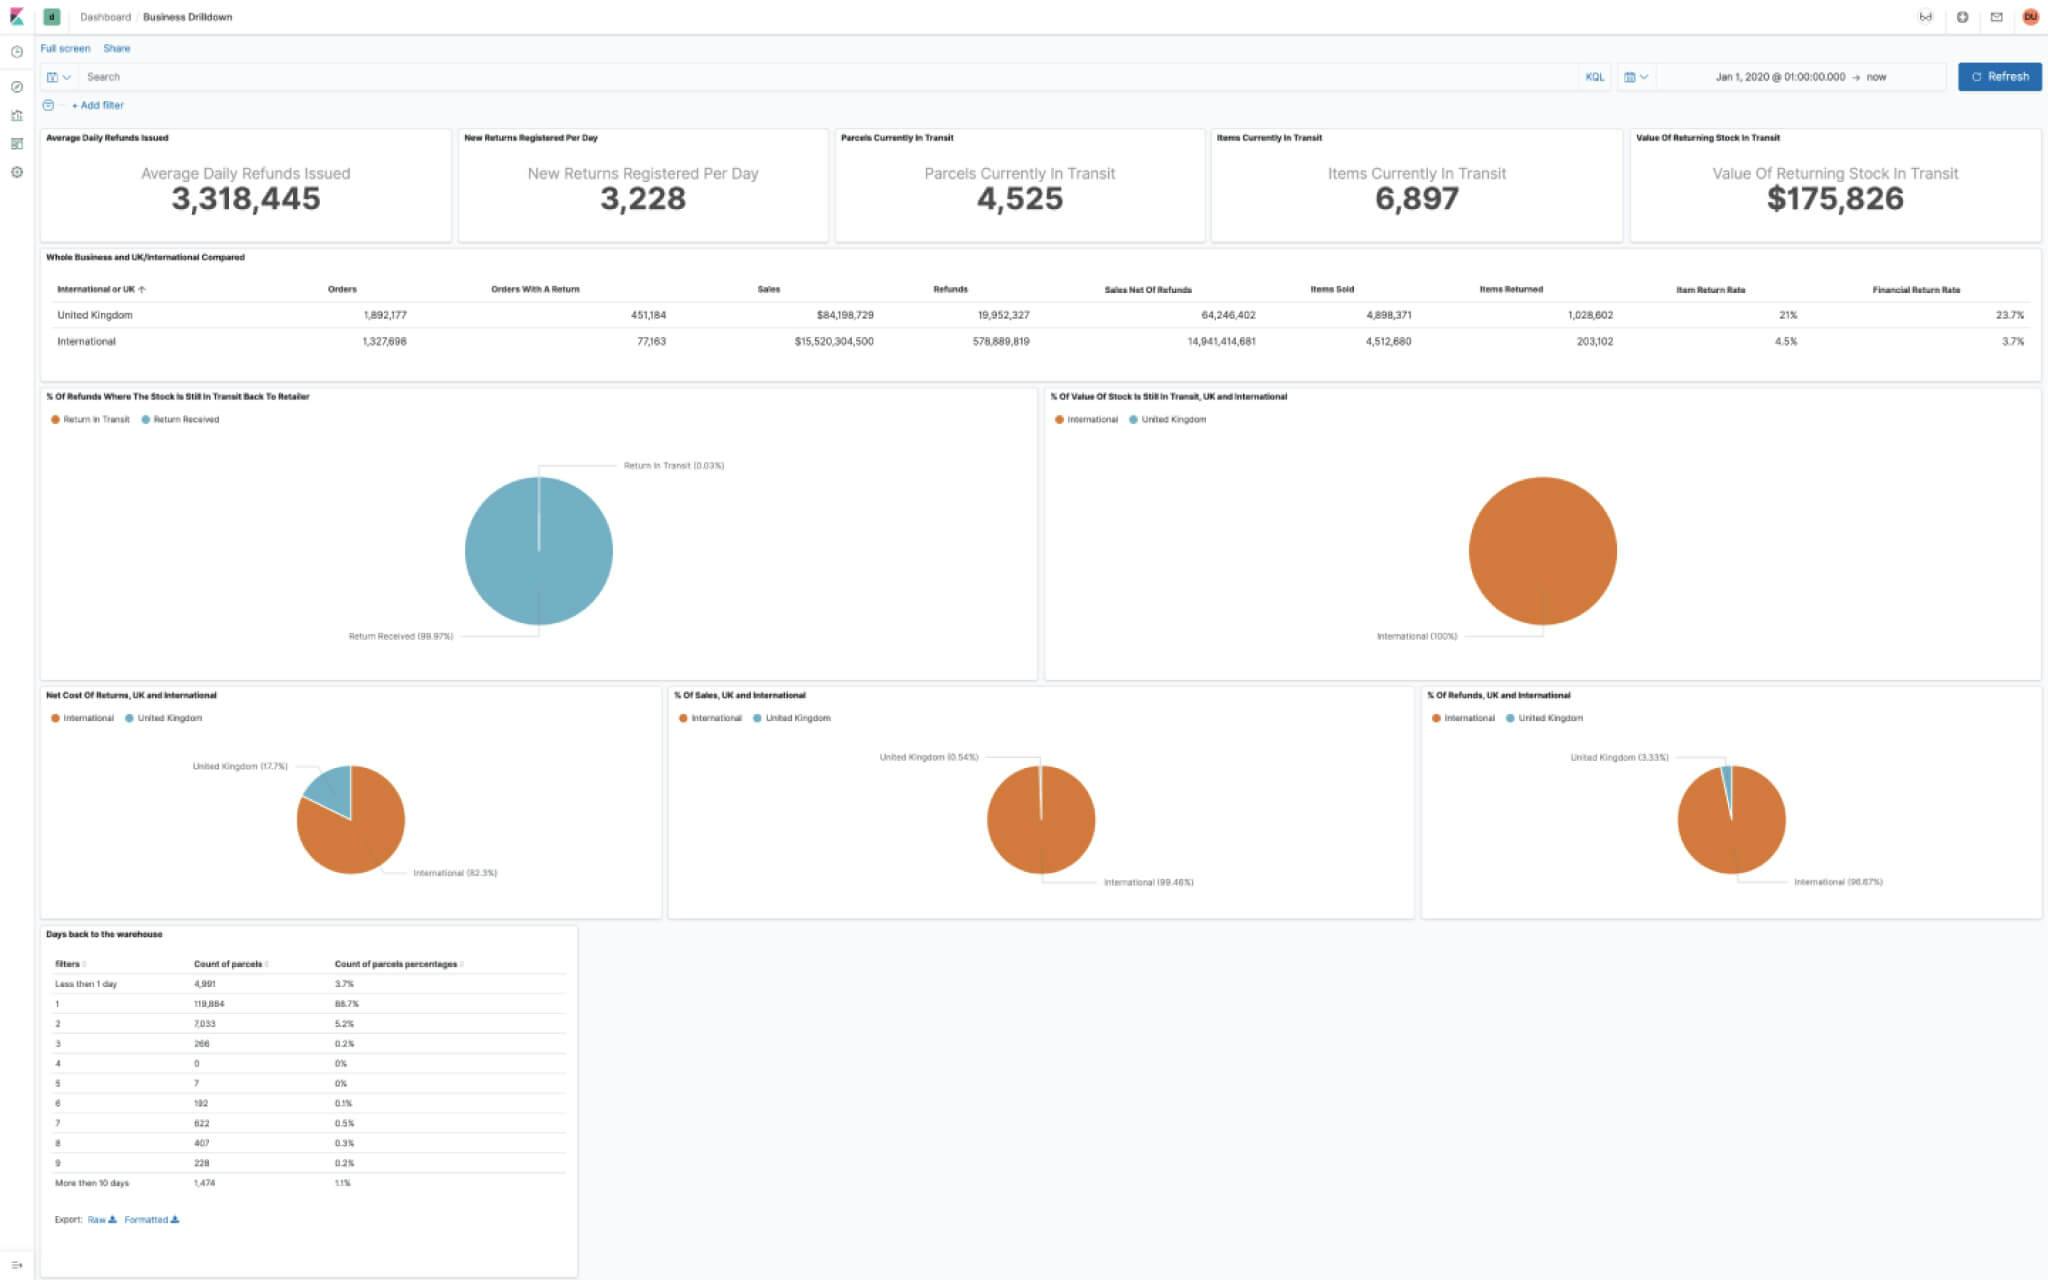 Dashboard with metrics and pie-charts analyzing returns for clothing retailers